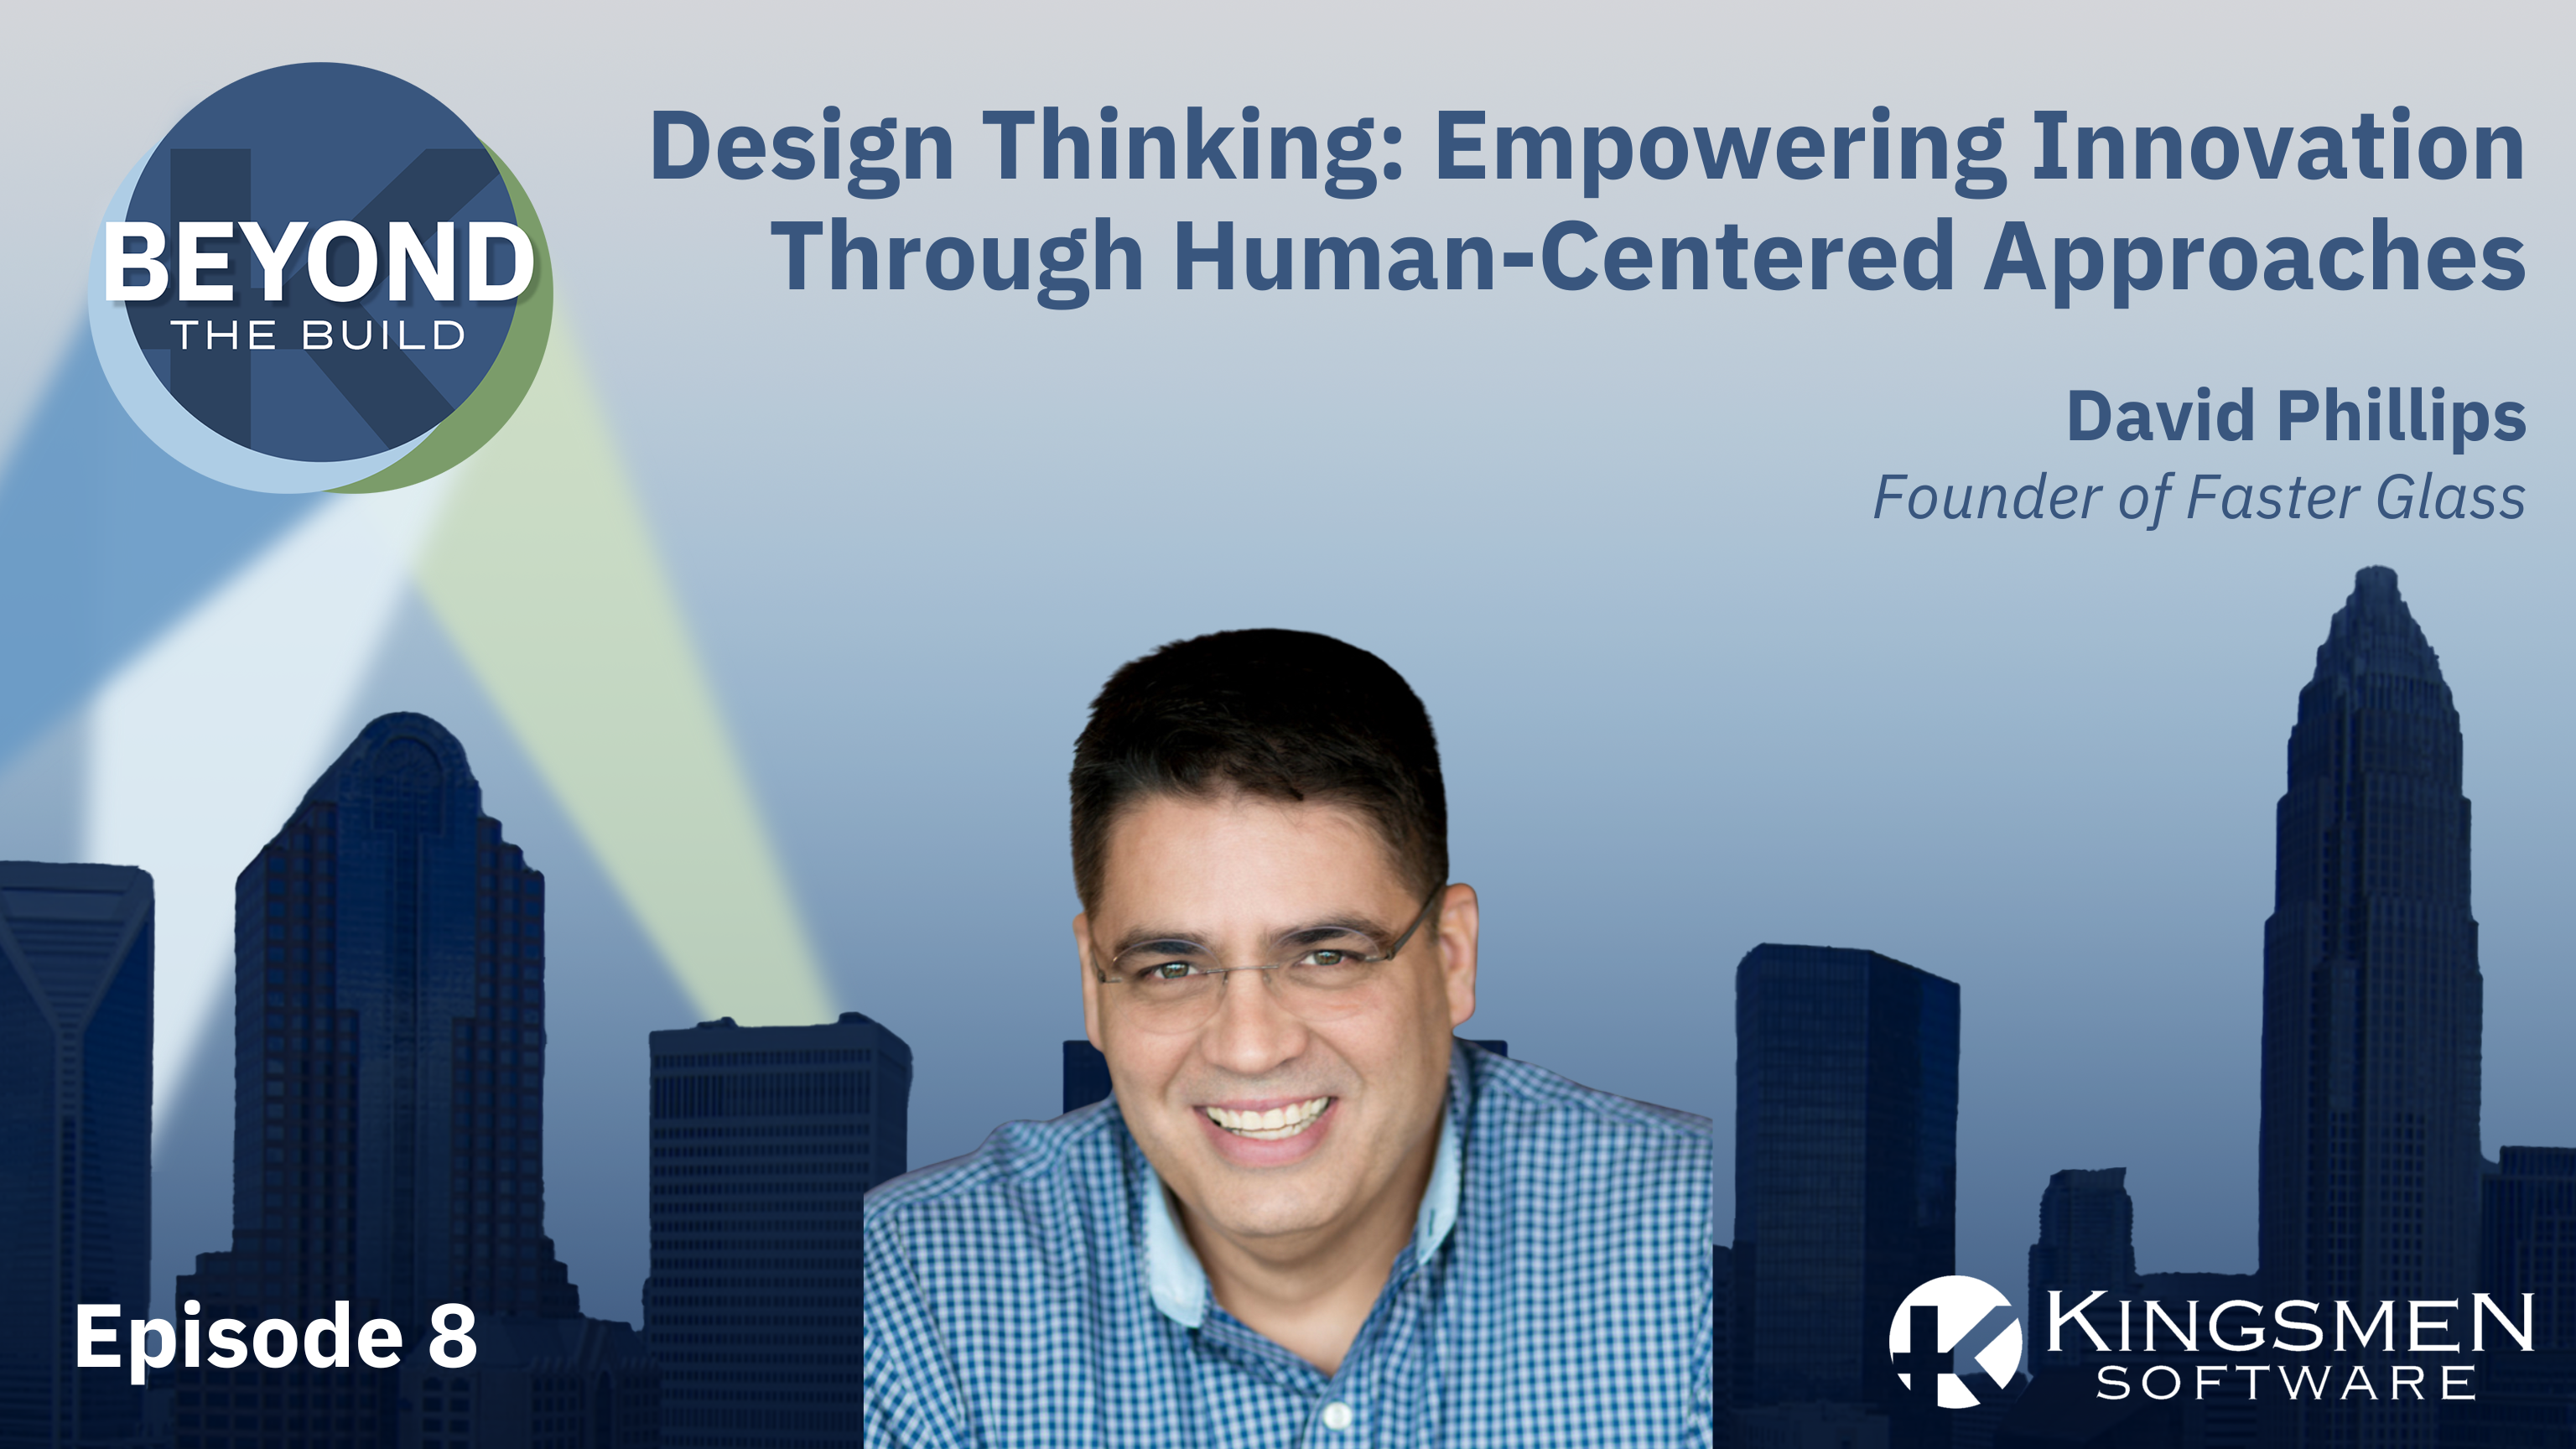 Episode 8: Design Thinking: Empowering Innovation Through Human-Centered Approaches with David Phillips of Faster Glass